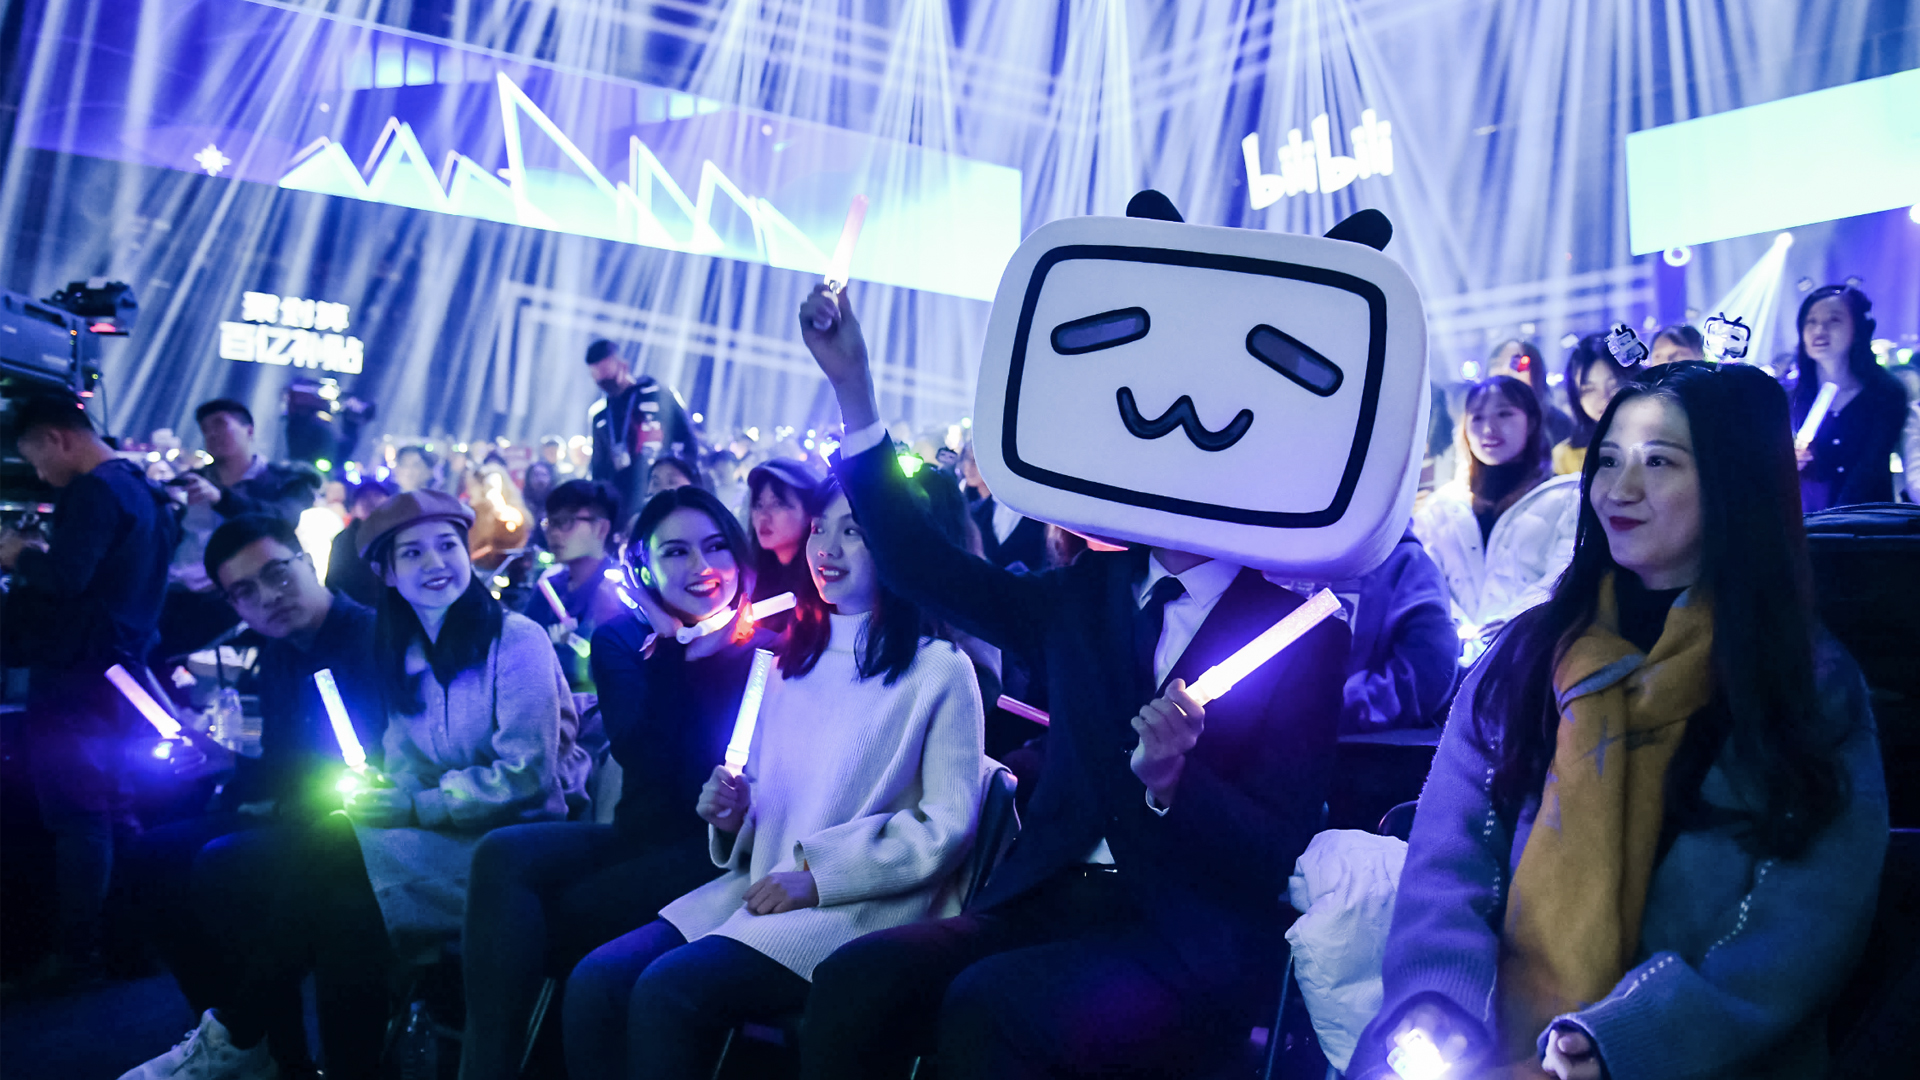 VIDEO | Here’s how Bilibili has grown to become more than China’s answer to YouTube